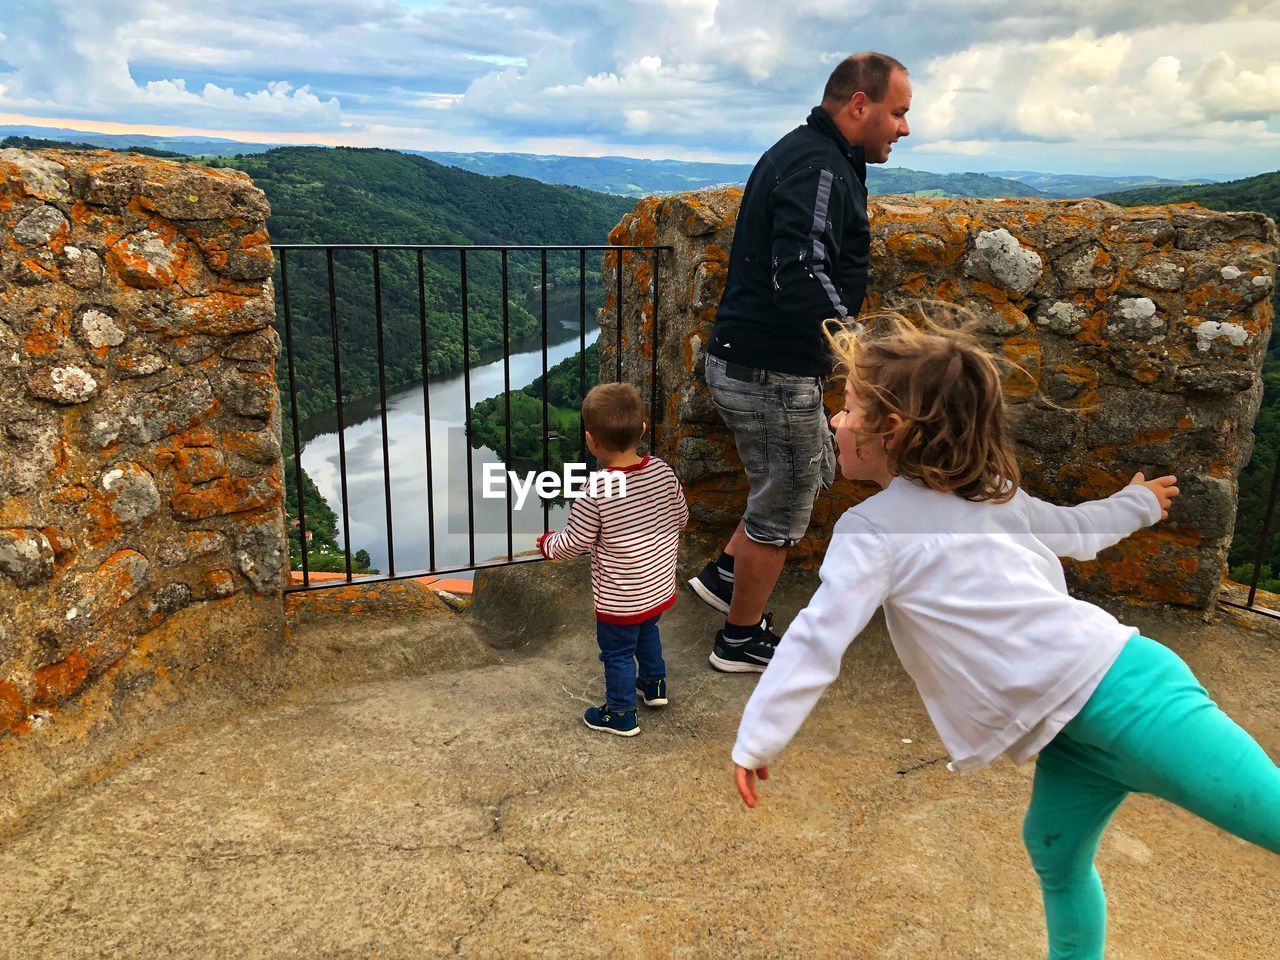 Family at observation point against mountains